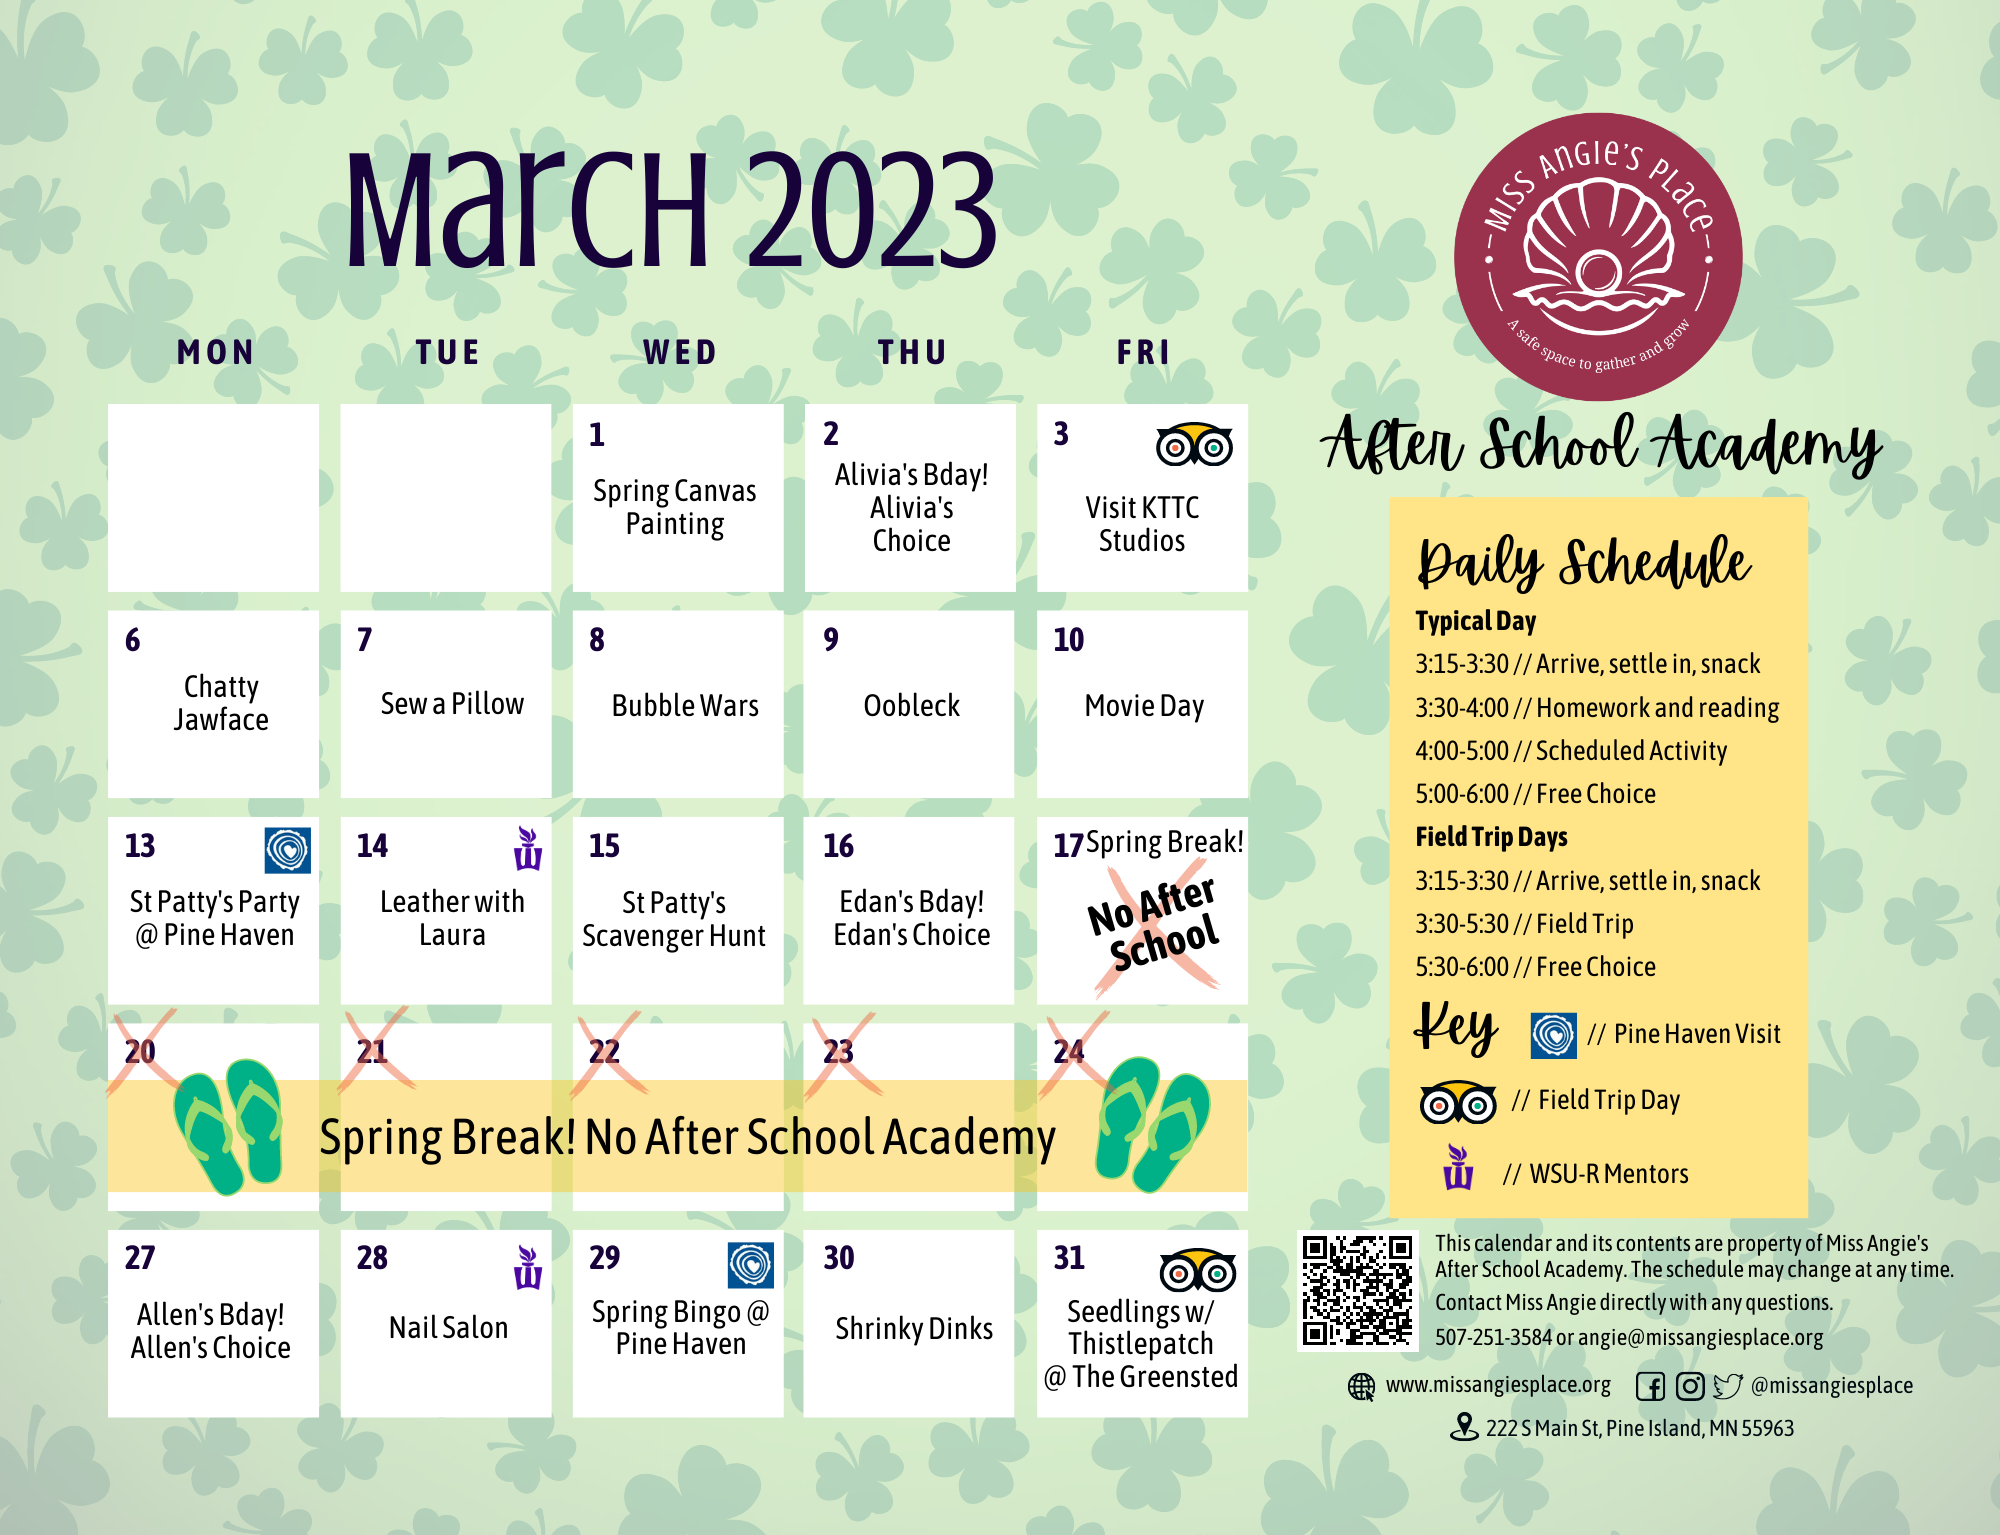 After School Academy March Calendar! Miss Angie's Place